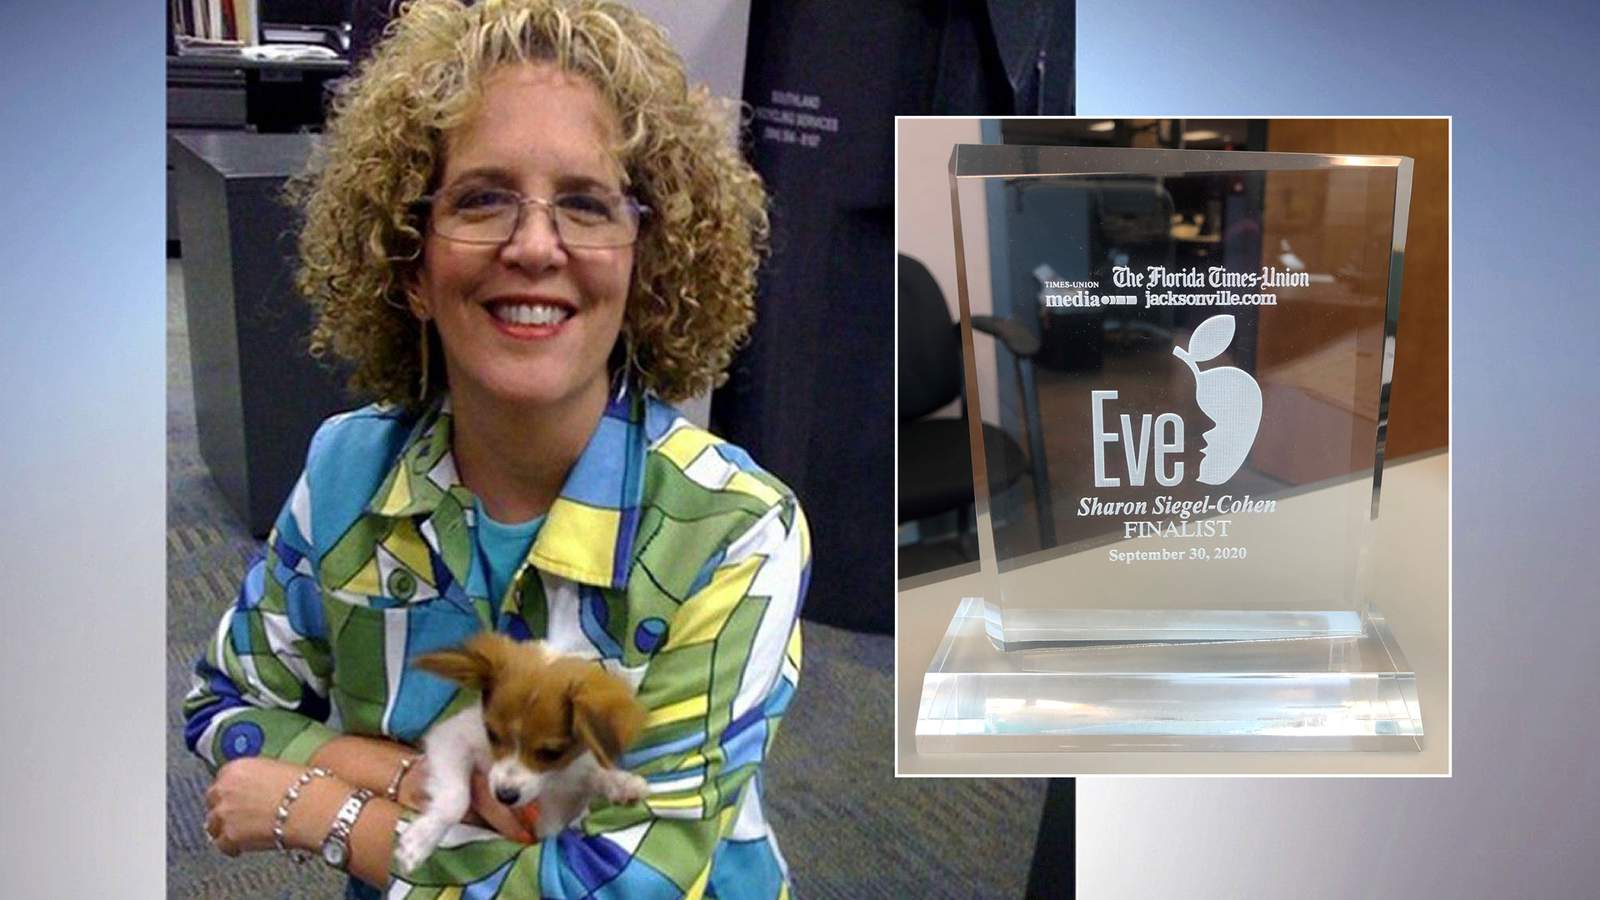 Longtime WJXT executive producer posthumously honored at Eve Awards